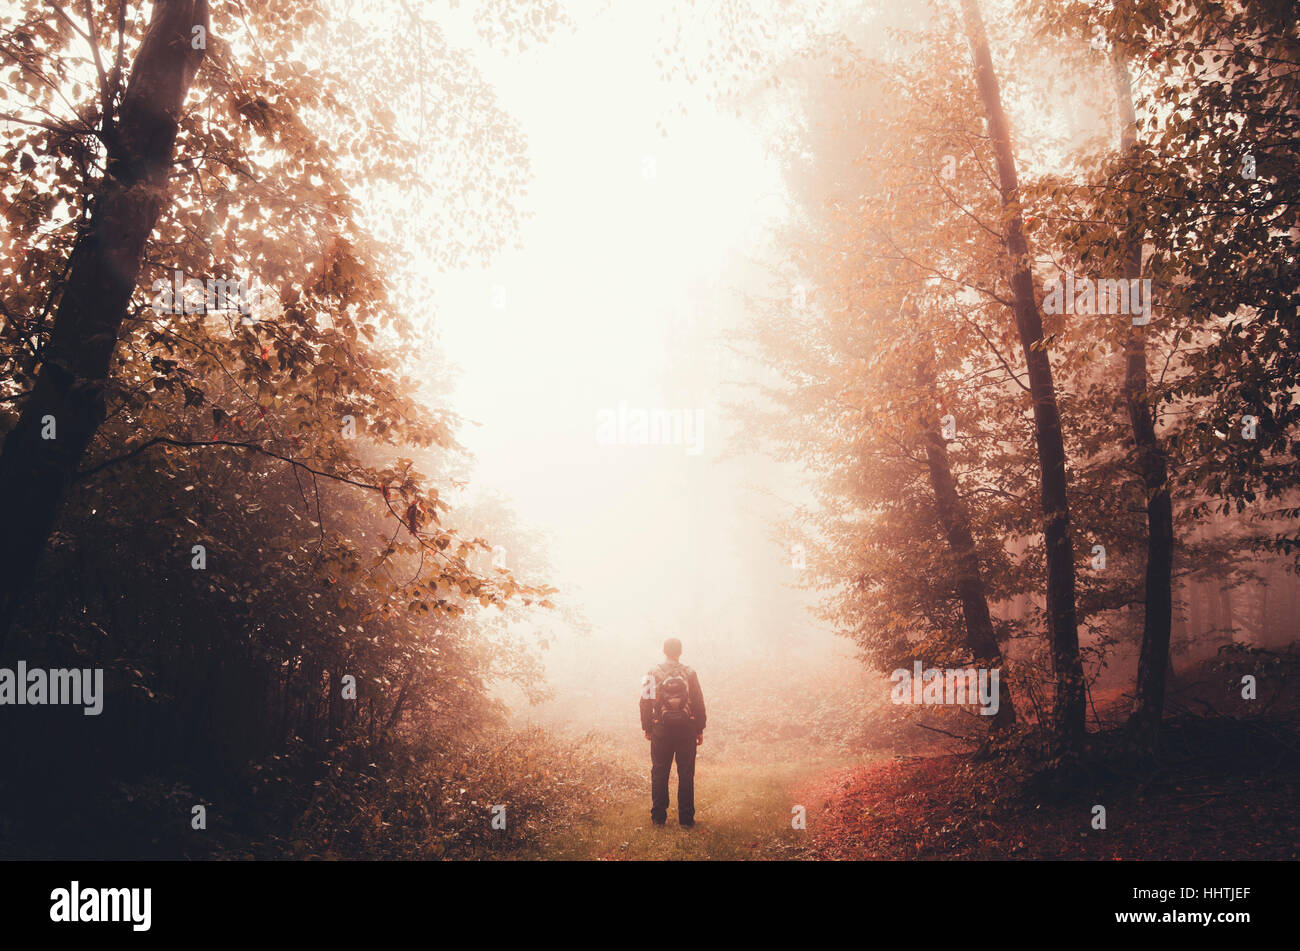 Man in autumn forest in sunset light, surreal enchanted atmosphere Stock Photo